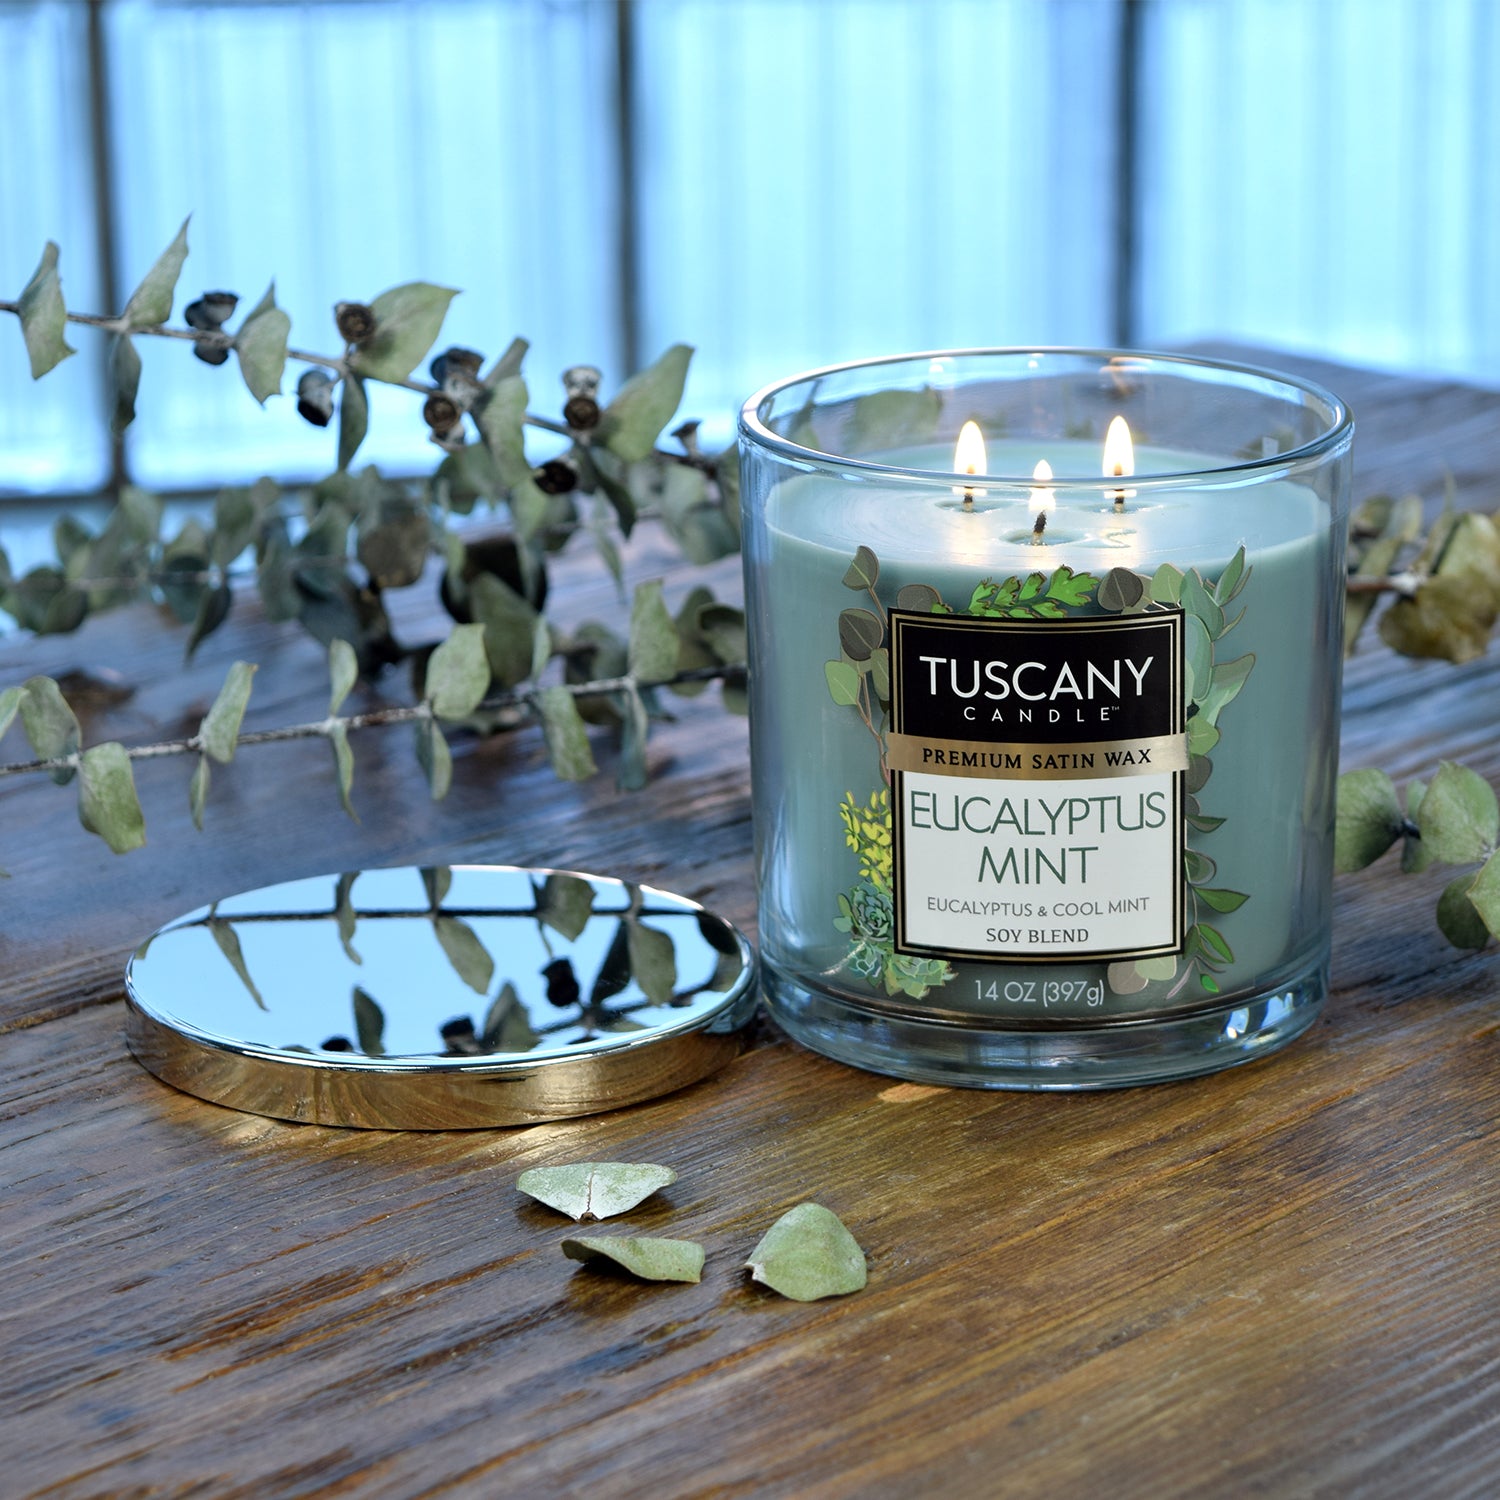 Eucalyptus Mint Long-Lasting Scented Tuscany Candle (14 oz) on a wooden table.